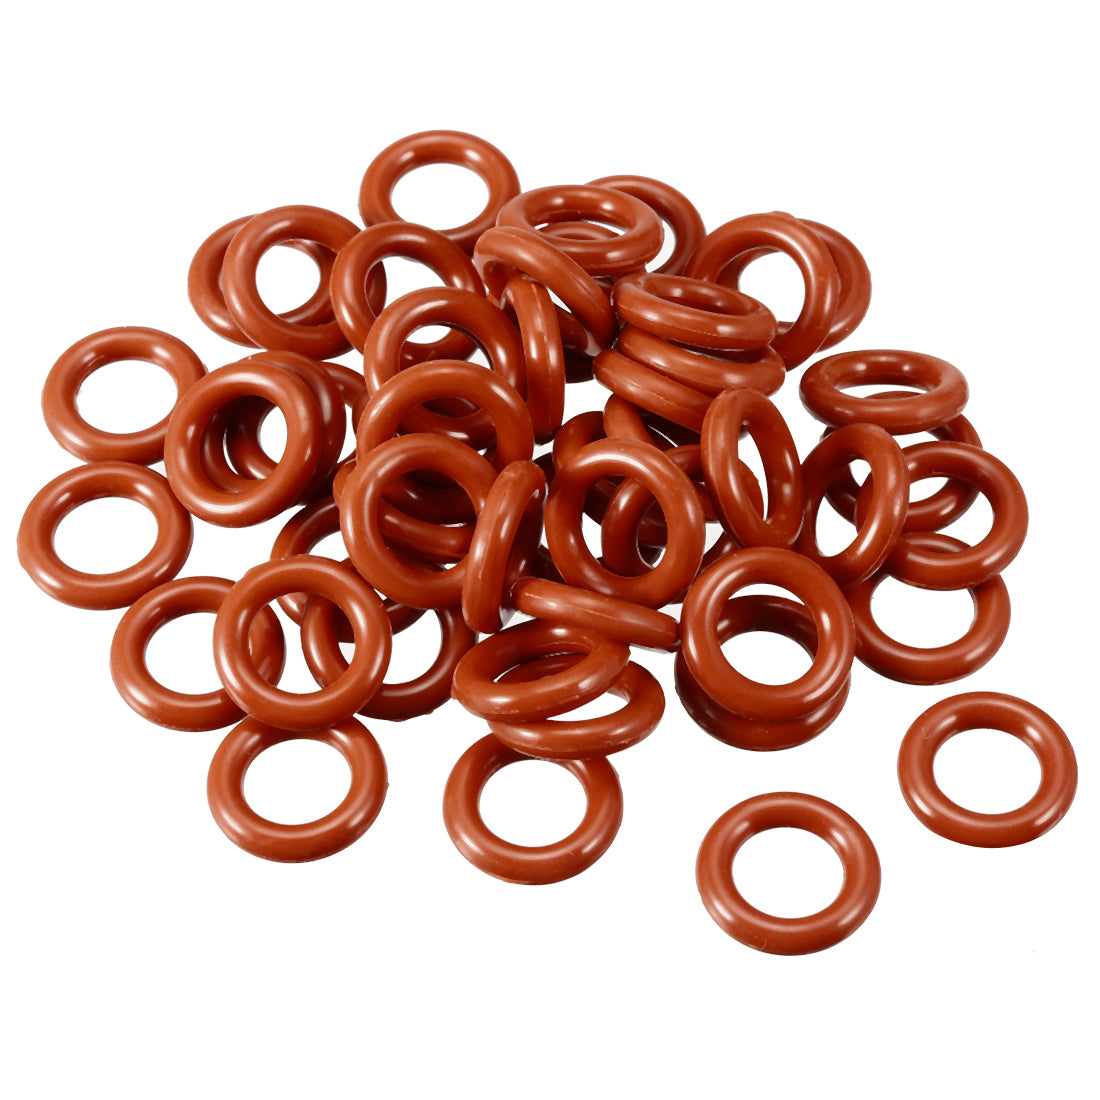 uxcell Uxcell Silicone O-Ring 15mmx8.8mmx3.1mm VMQ Seal Rings Sealing Gasket Red 50PCS